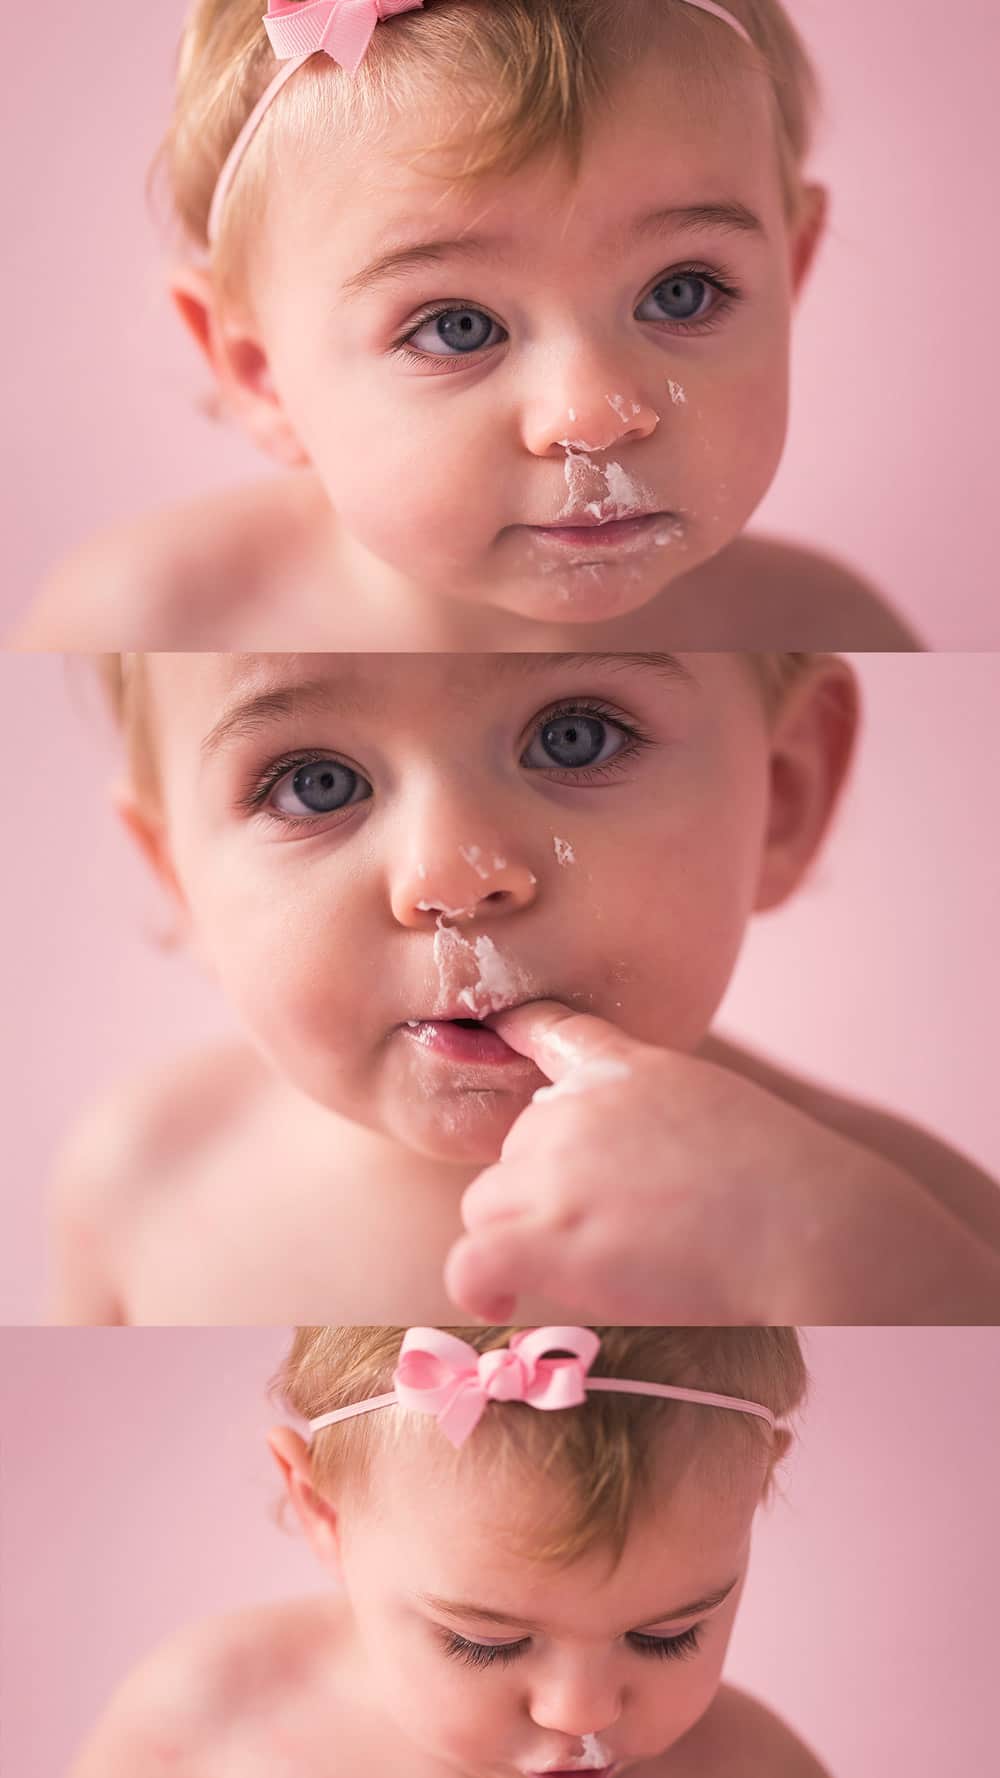 Newborn Photography & Retouching Part 2 Your First Year Plan - | PRO EDU first year guide for photographers to create newborn photography posing and business plan for clients. Online tutorials for photographers